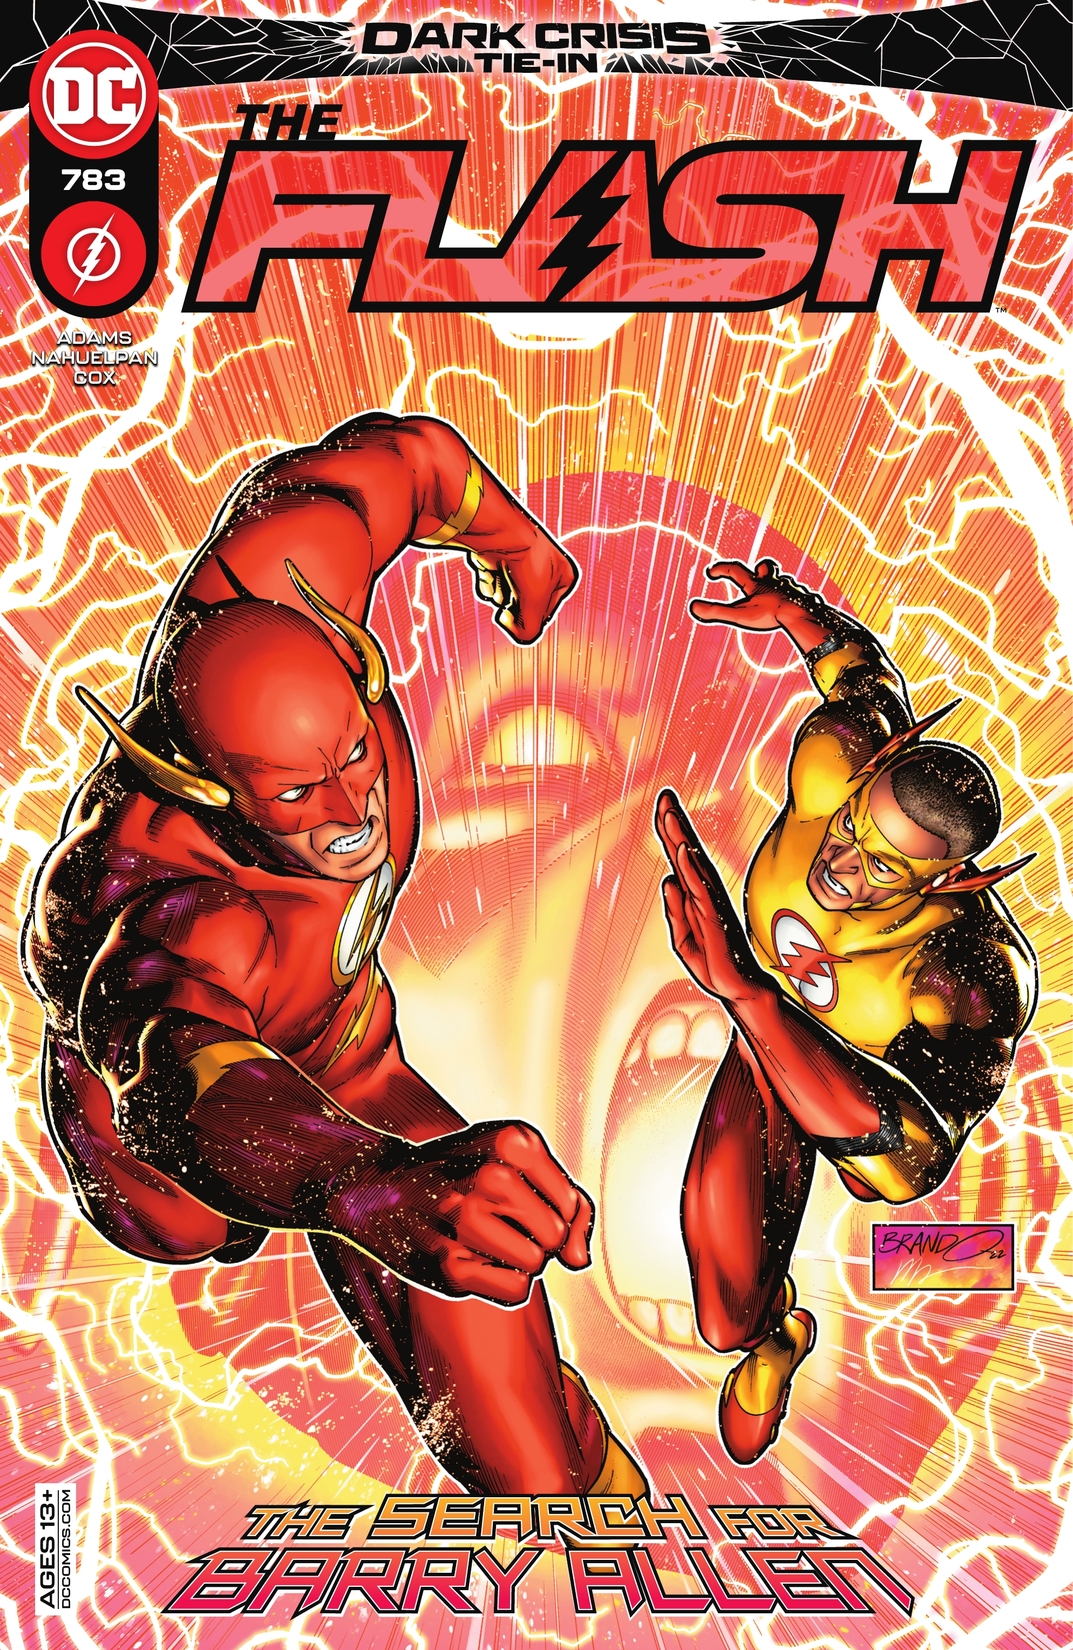 The Flash (2016-) #783 preview images